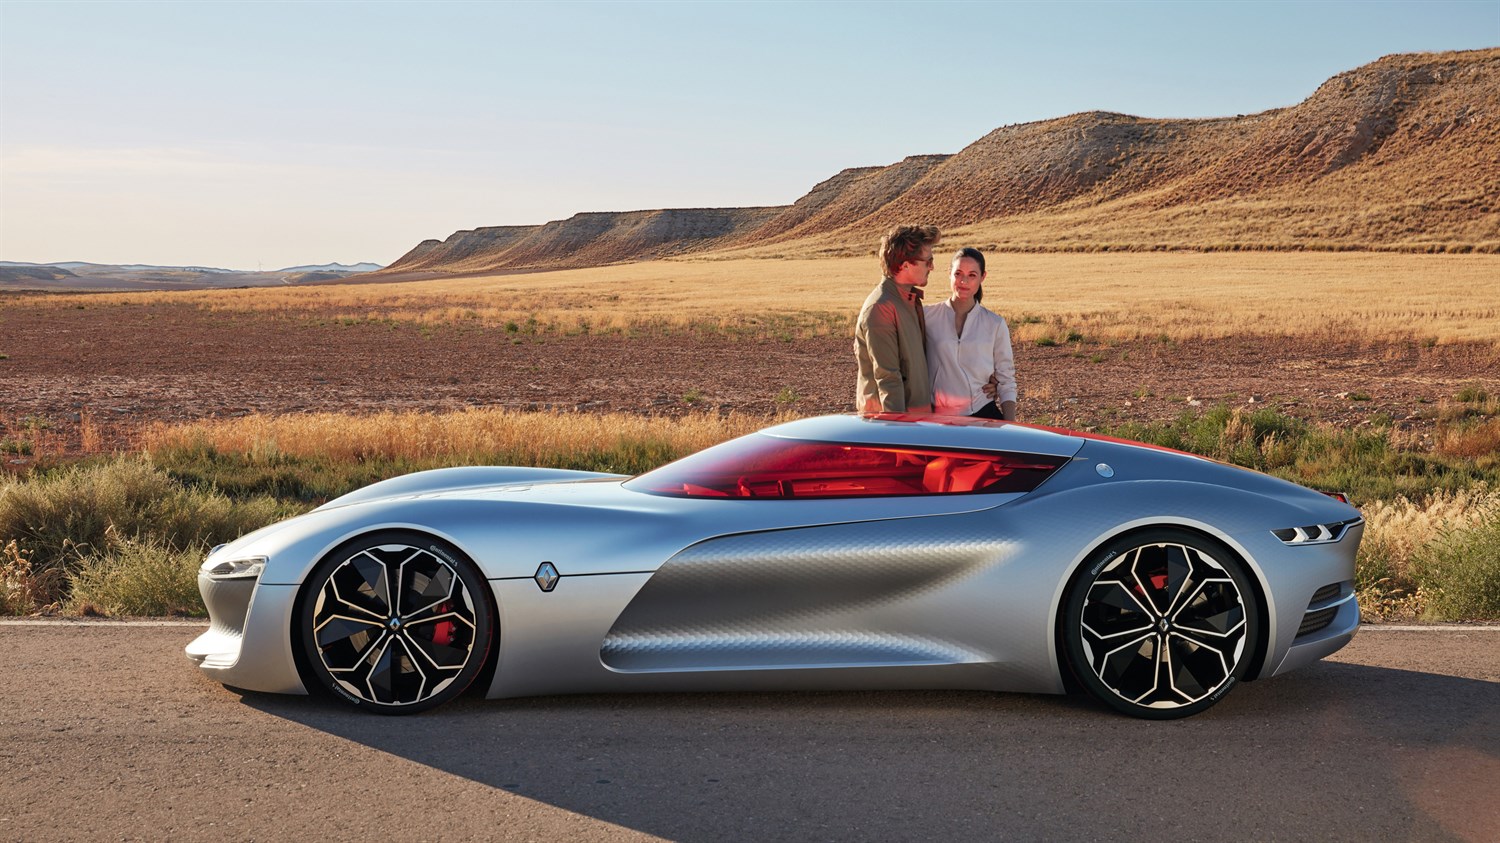 A couple standing next to Renault TREZOR concept car on the road"